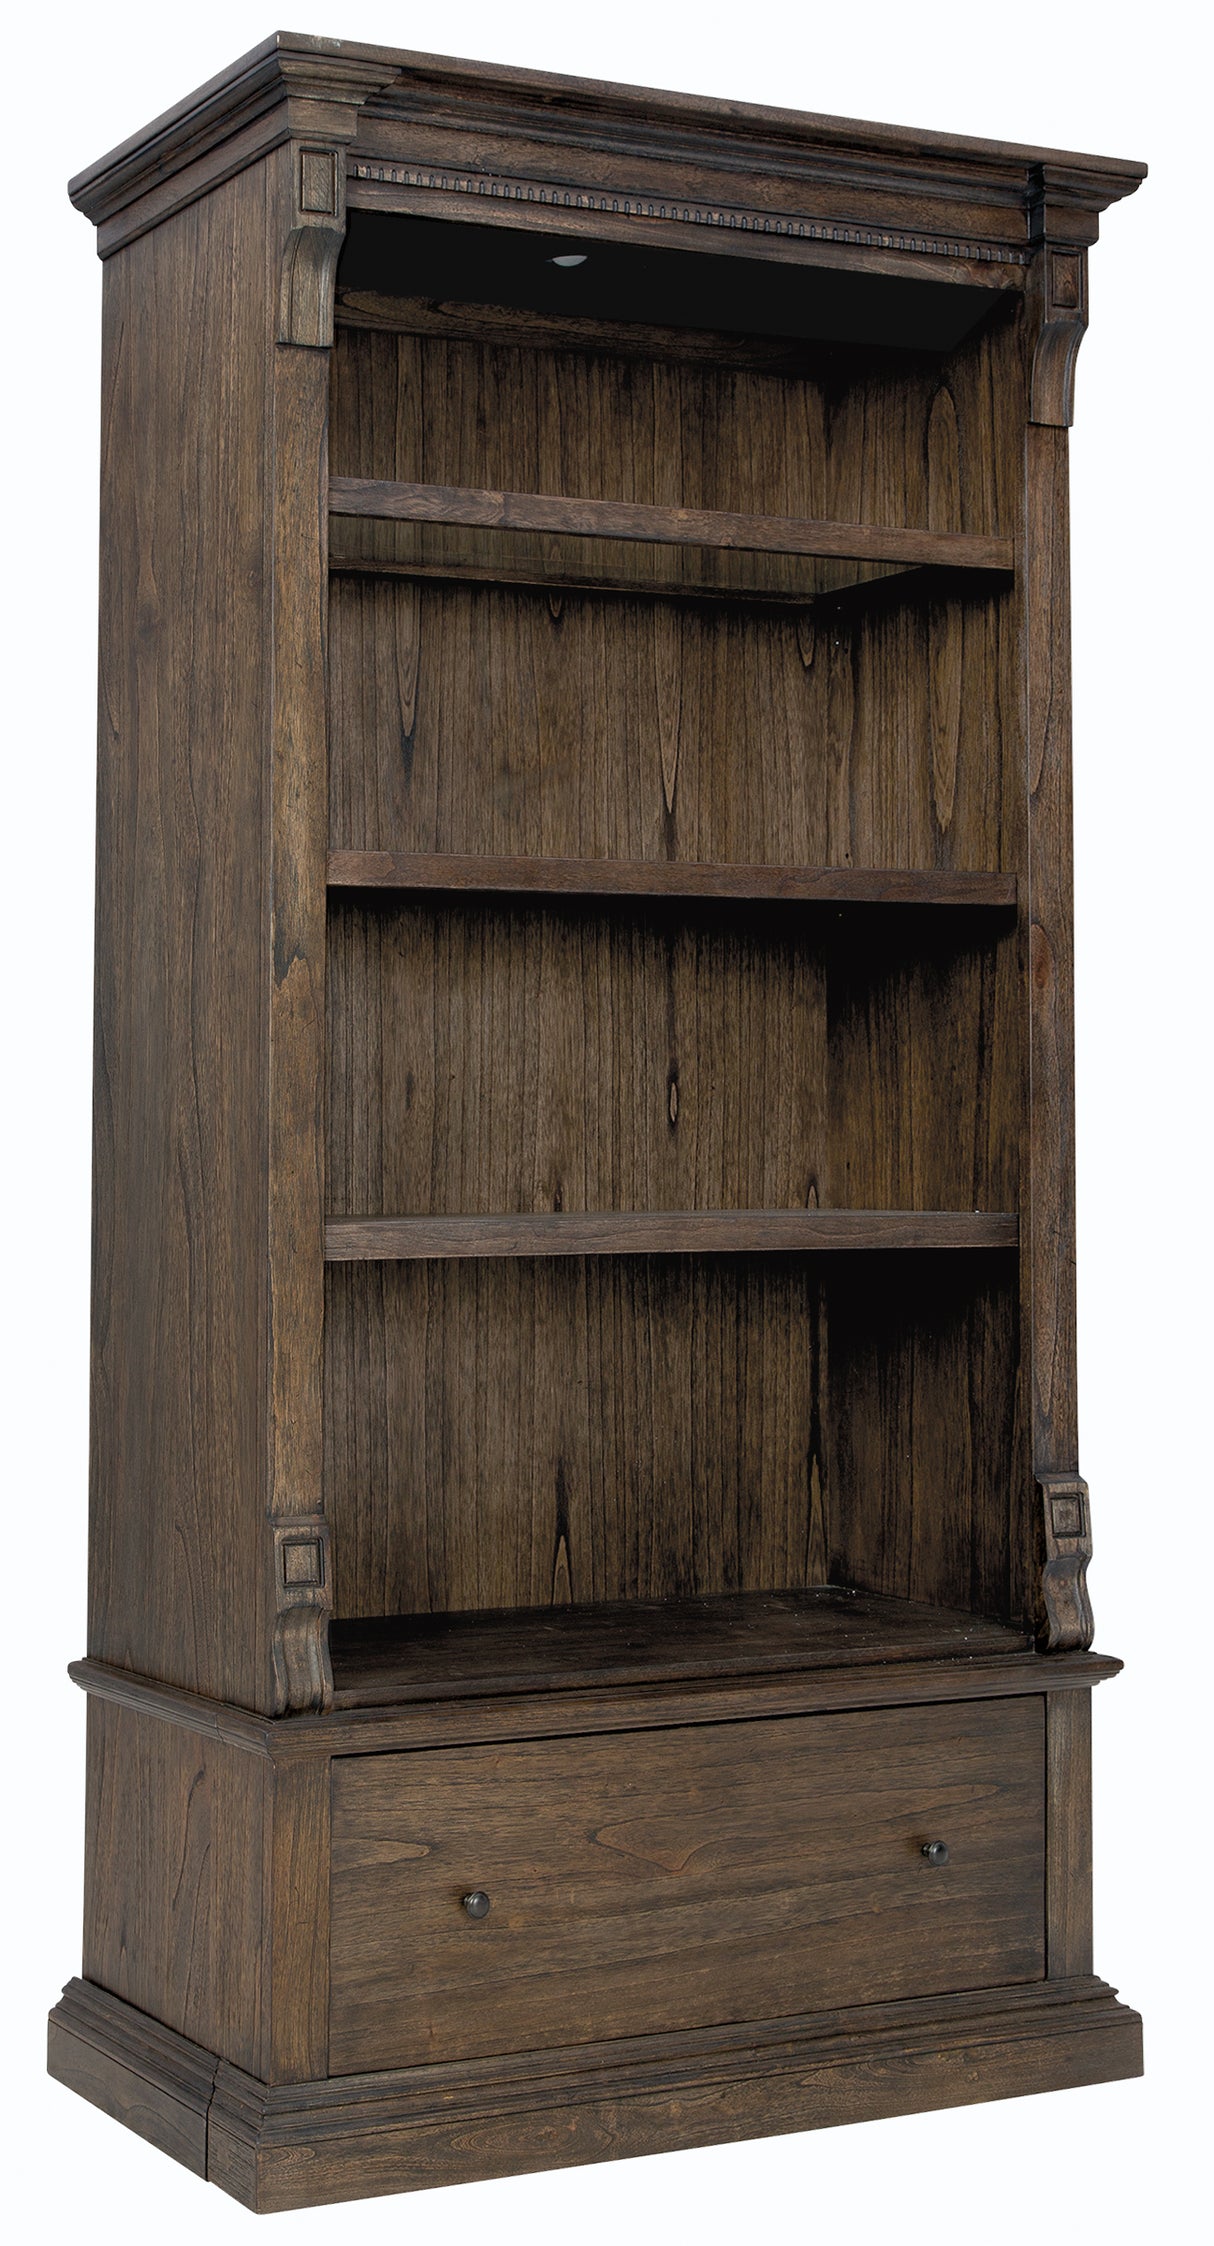 Hekman 79424 Wellington Estates Office 46.75in. x 19.5in. x 84.5in. Executive Center Bookcase